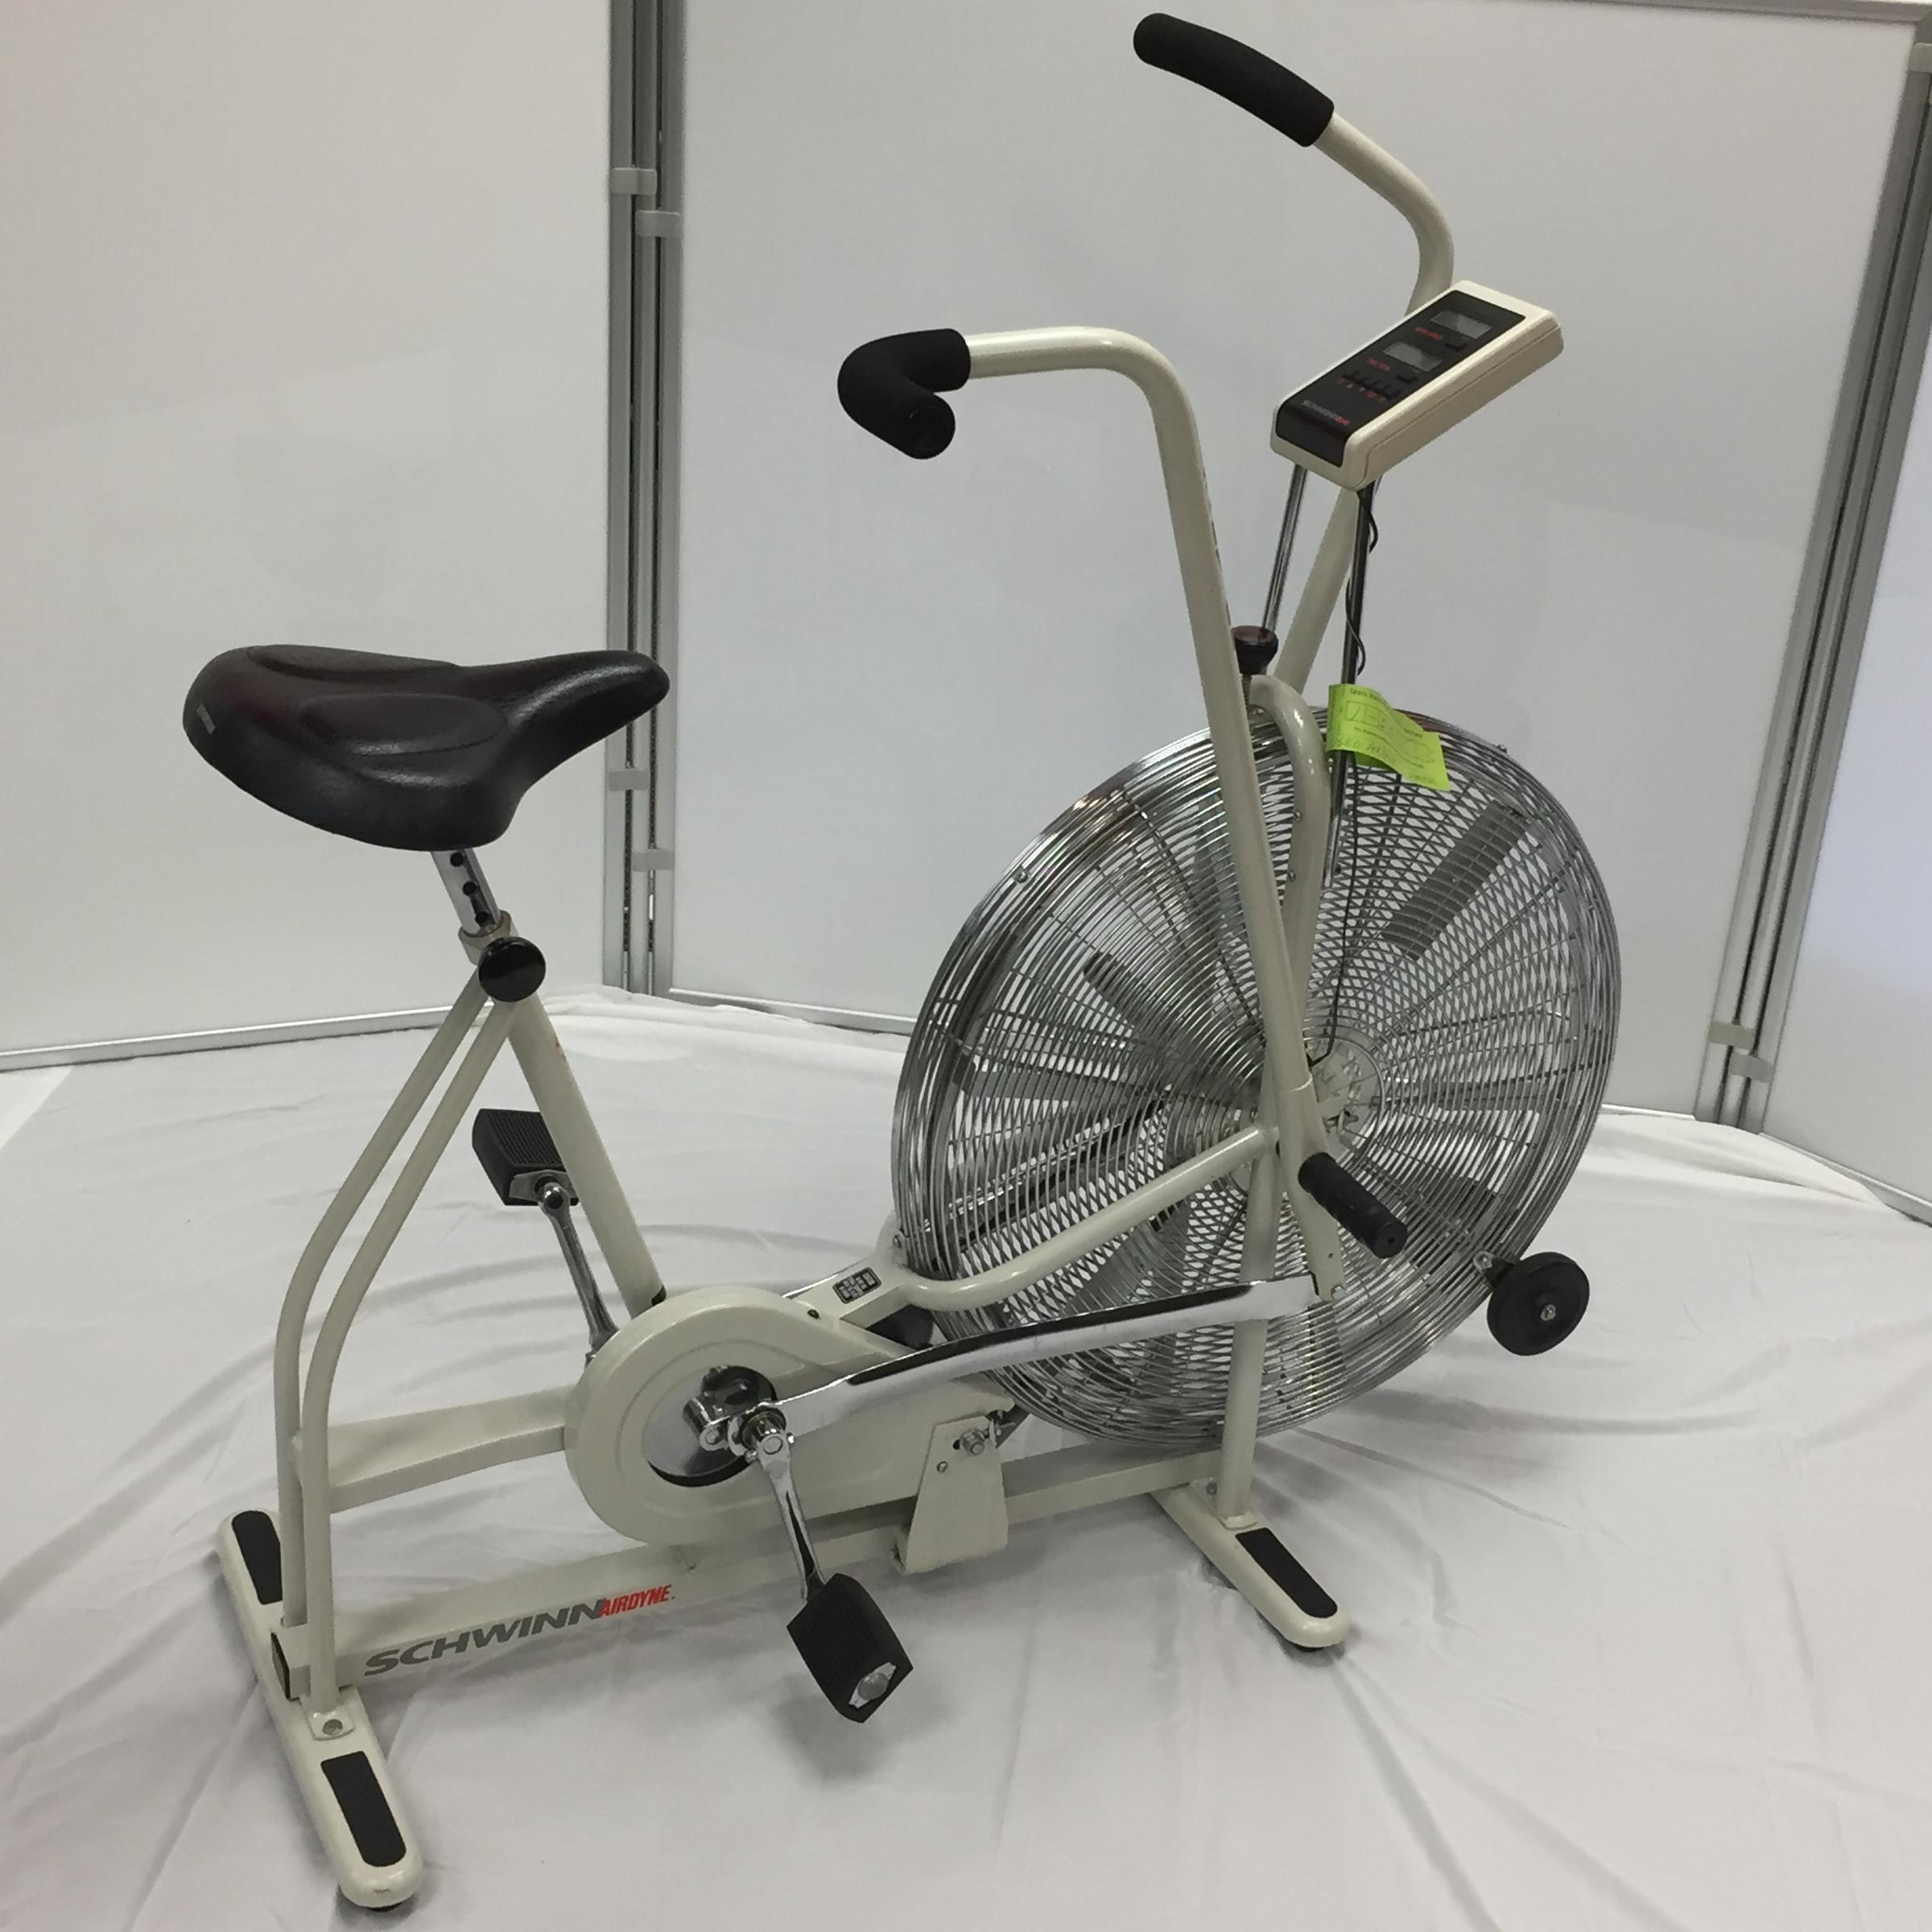 airdyne for sale